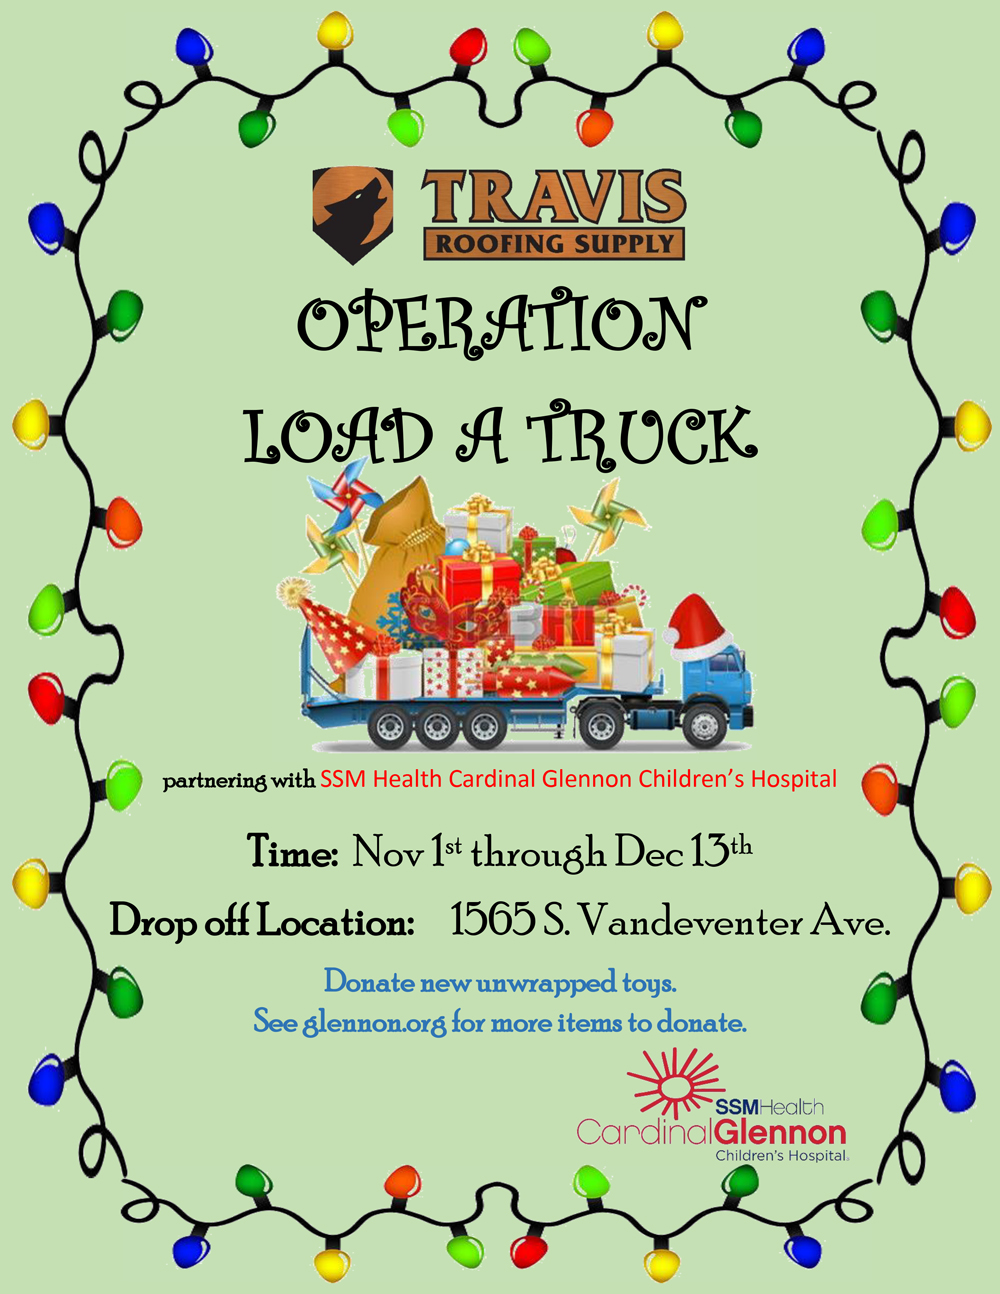 Operation Load a Truck at Travis Roofing Supply; Nov. 1 - Dec. 13